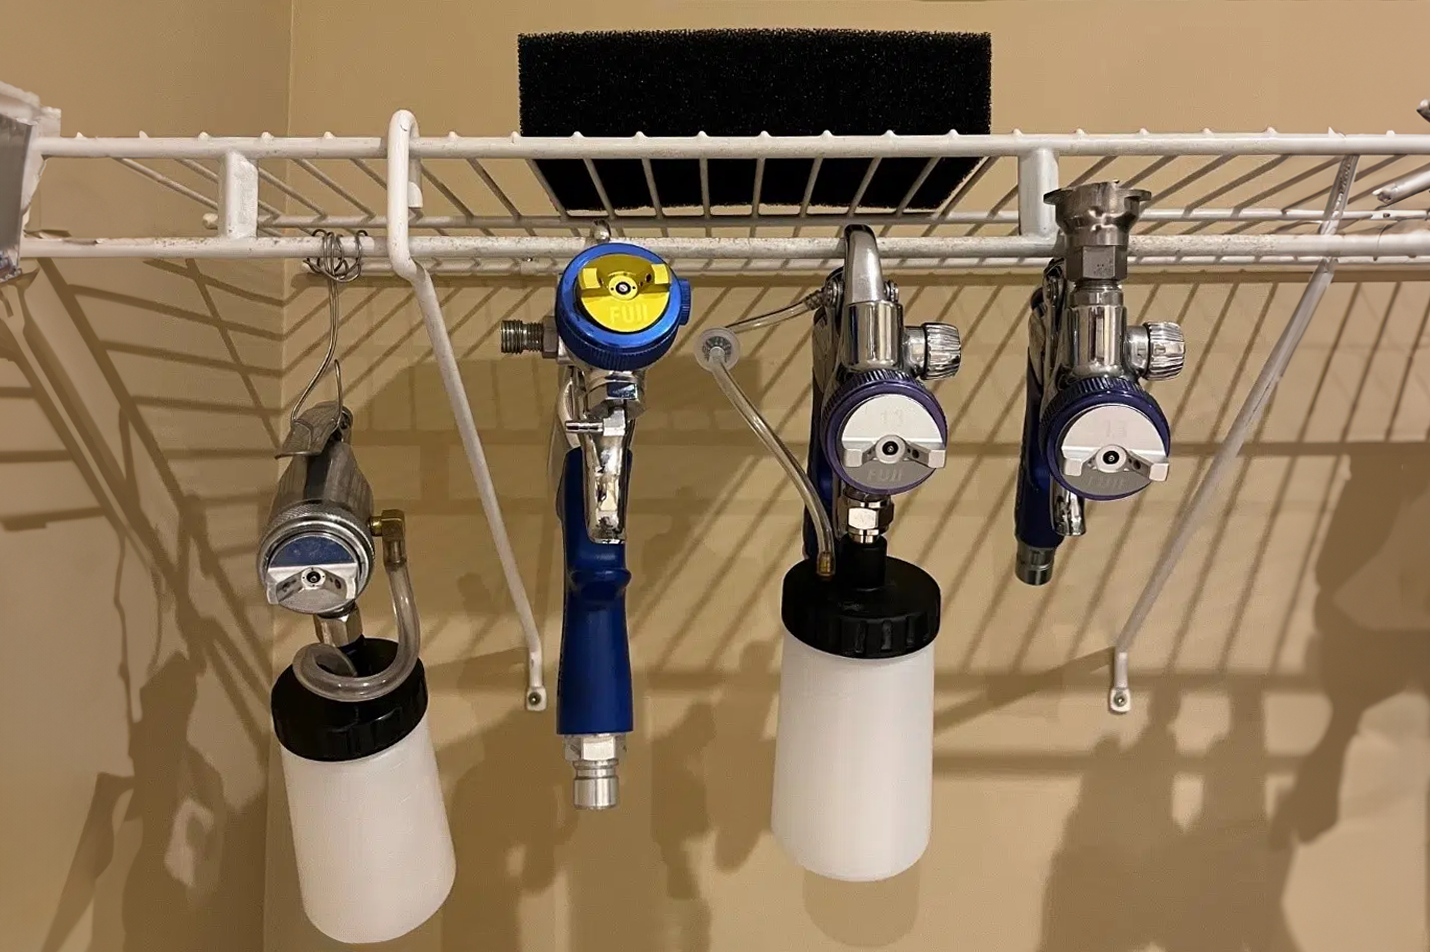 Different HVLP spray guns and turbine filter hanging to dry